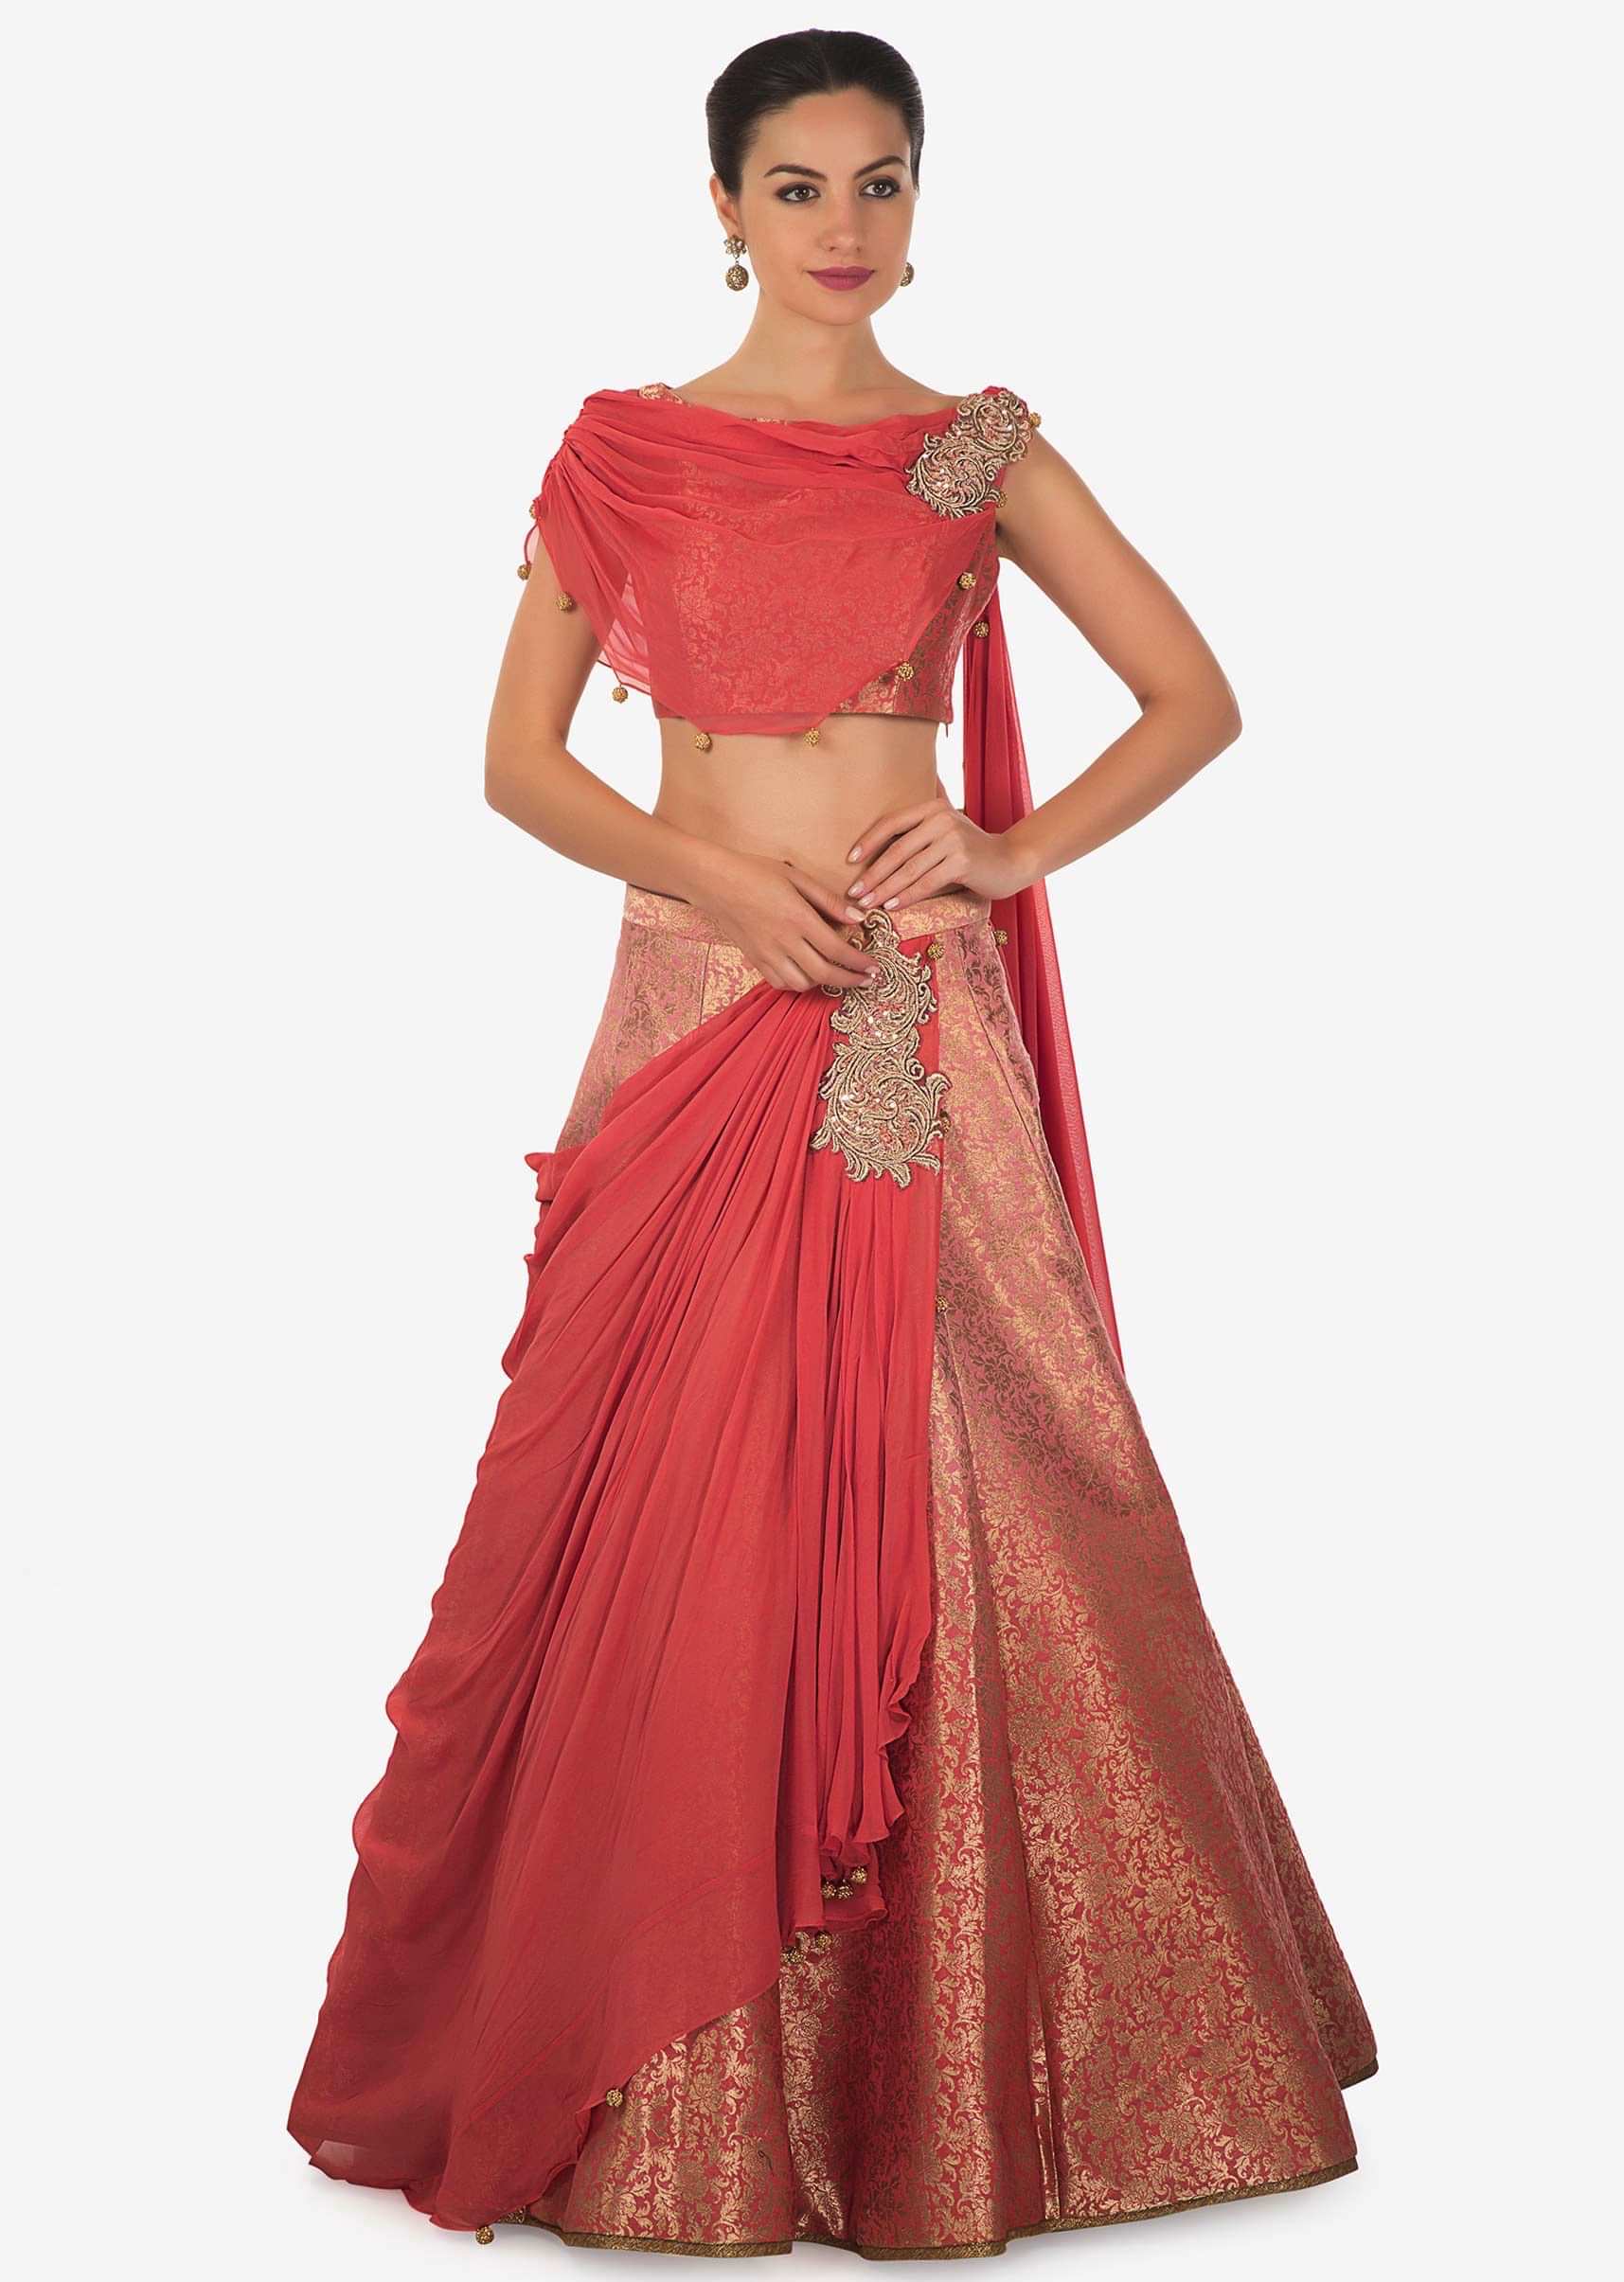 Peach brocade lehenga with pre stitched drape highlighted in zari and sequin butti only on Kalki